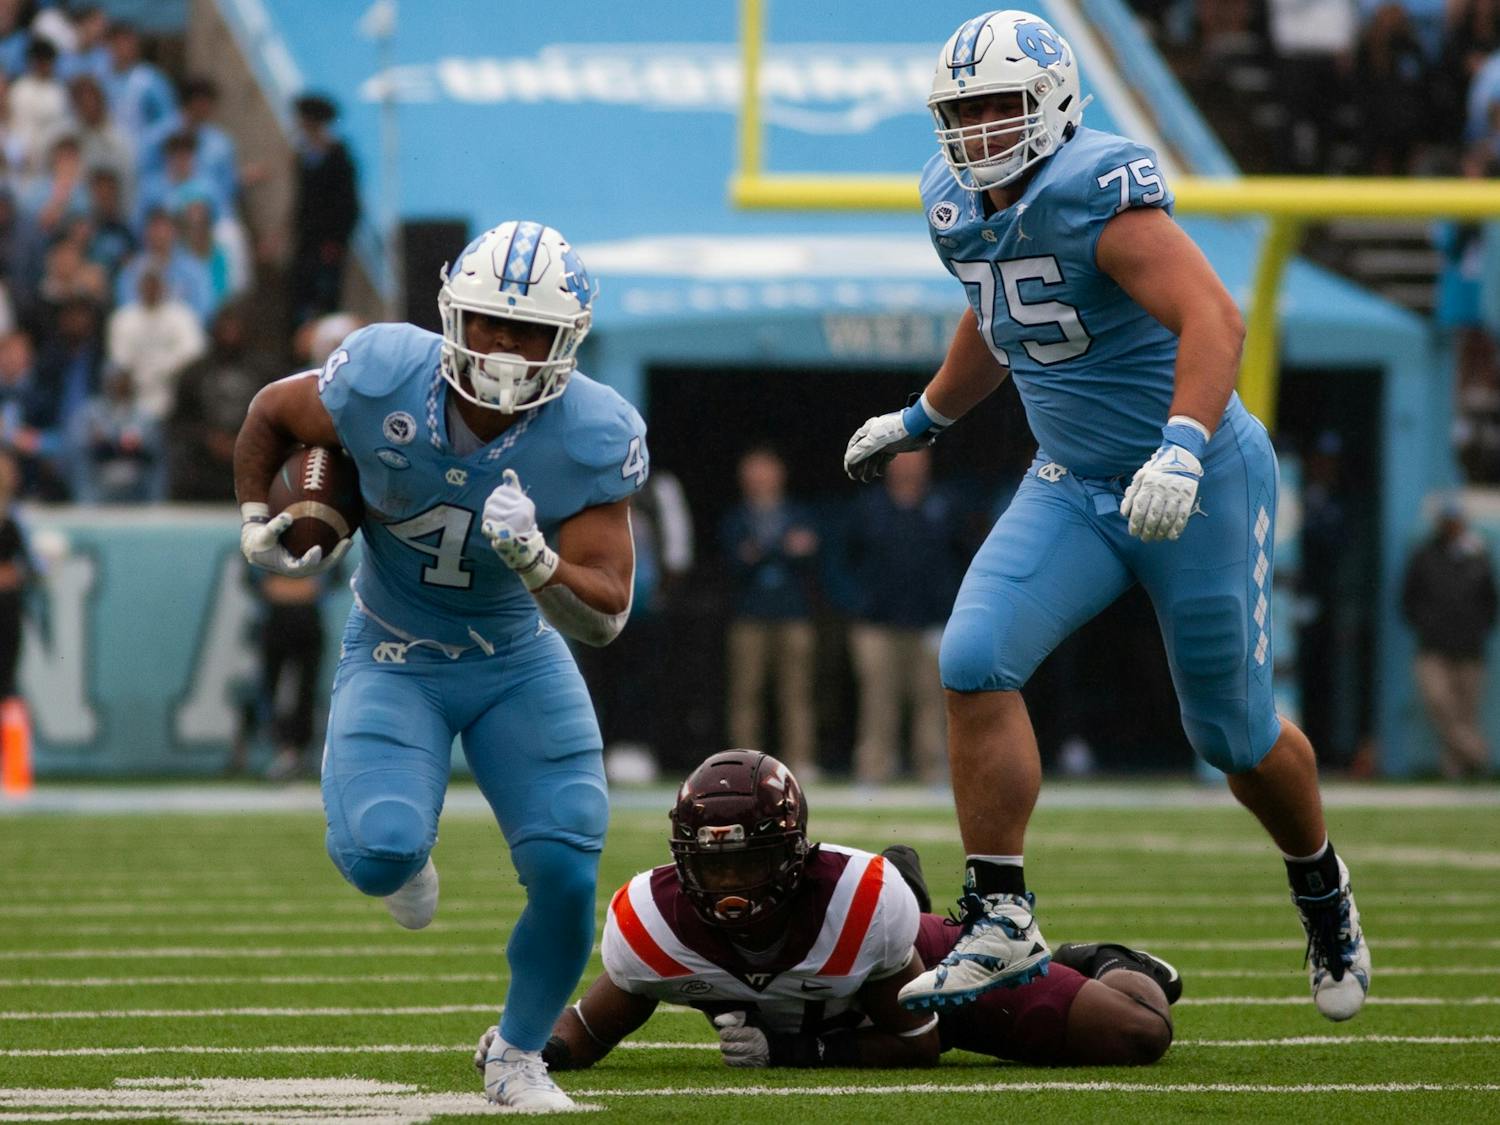 UNC sophomore running back Caleb Hood (4) runs past a tackle during a home football game at Kenan Stadium against Virginia Tech on Saturday, Oct. 1, 2022. UNC won 41-10.